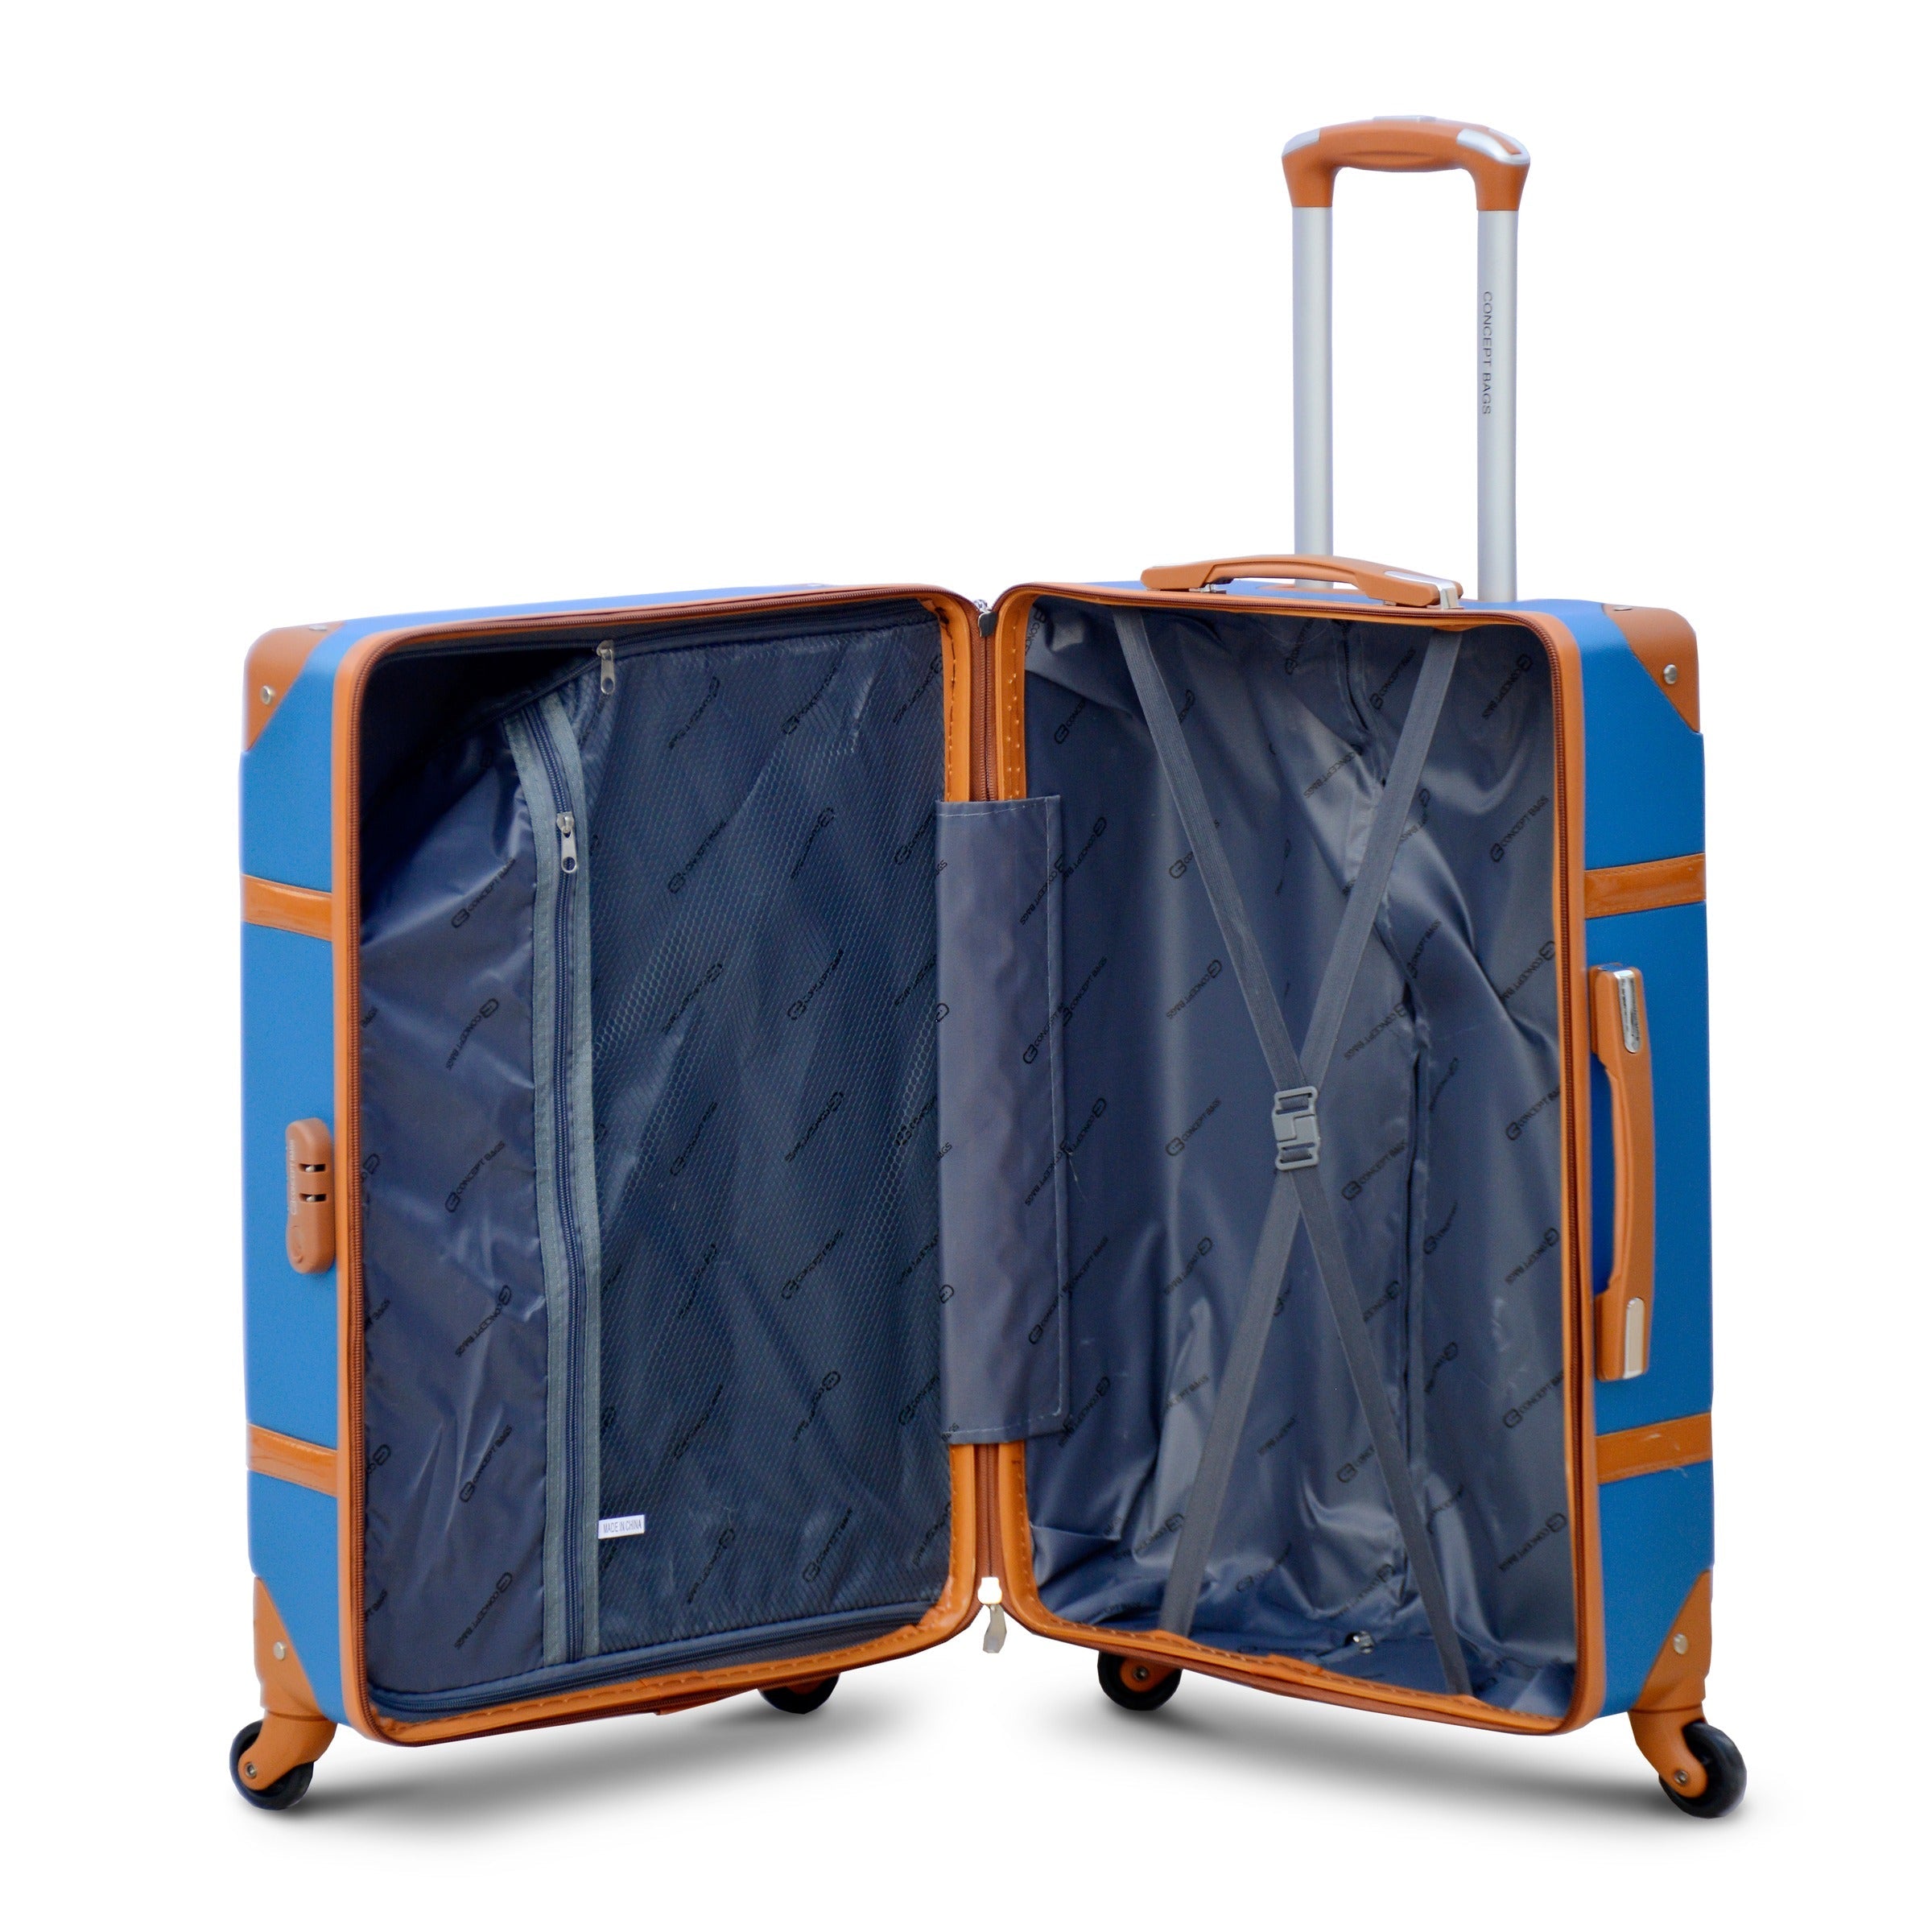 Corner Guard Lightweight ABS Luggage | Hard Case Trolley Bag | 24 Inches | Blue Colour